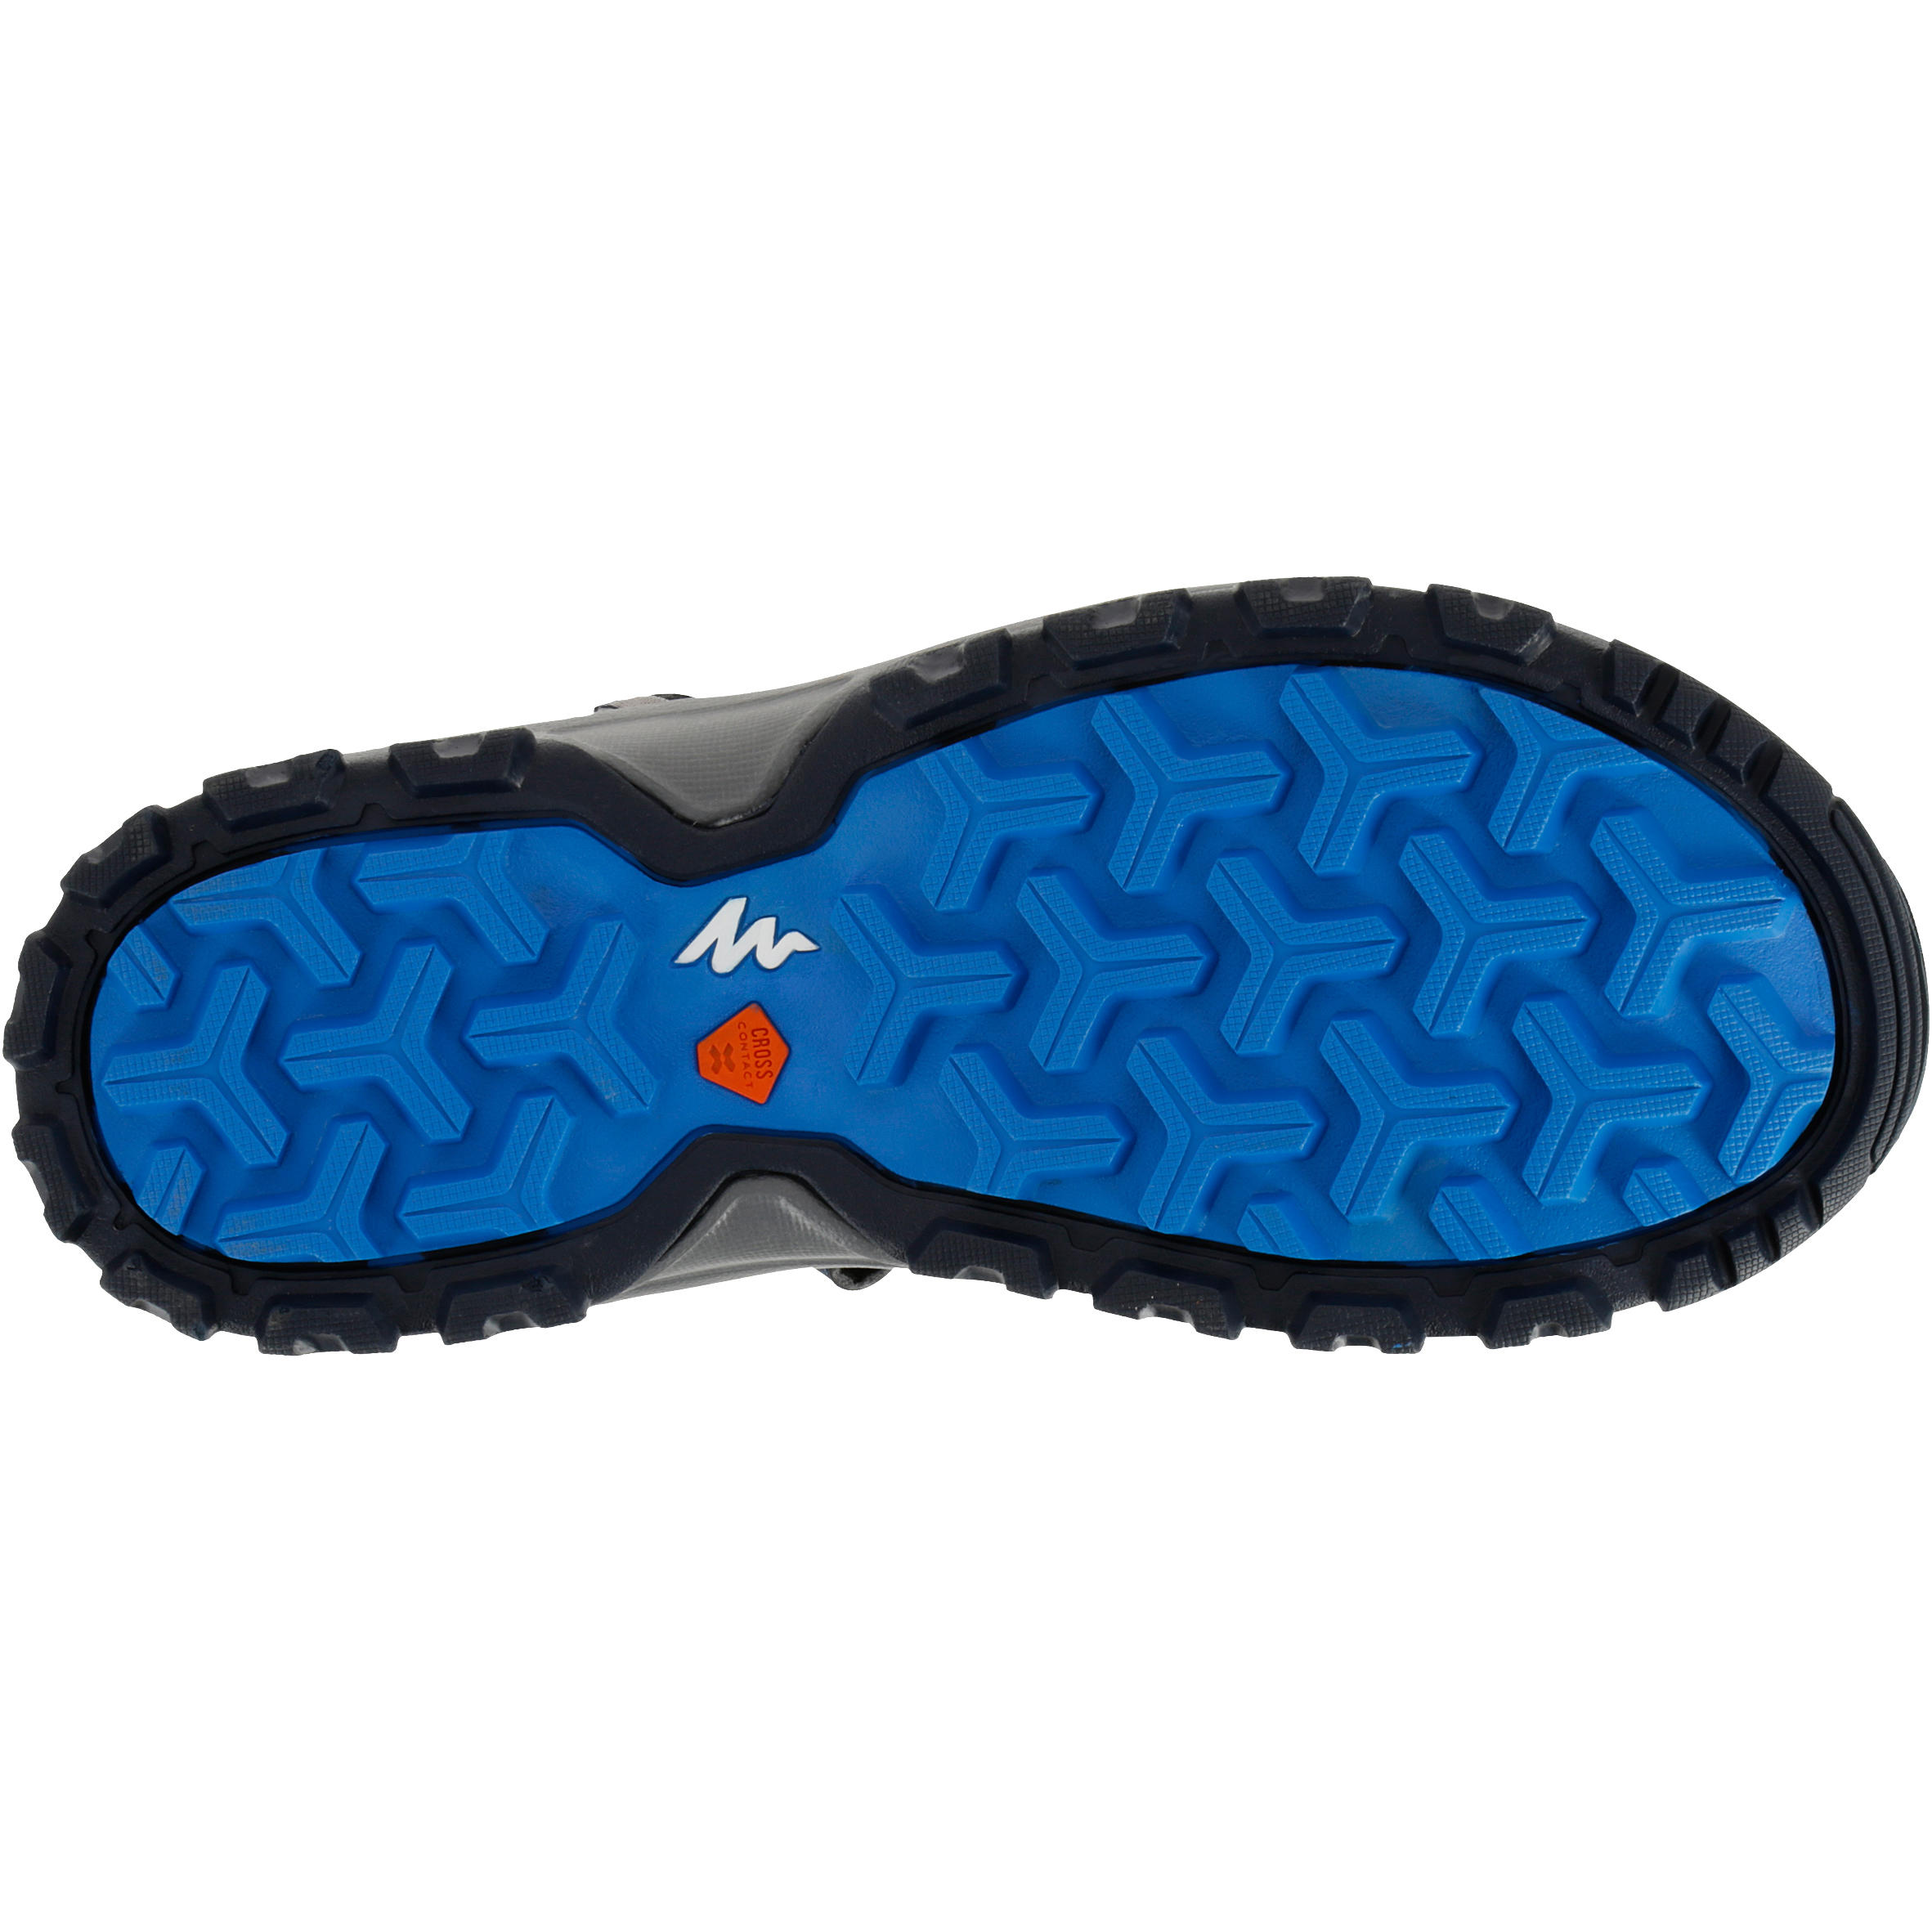 Kids’ Hiking Sandals MH150 - size 10 to 6 - Blue 5/8